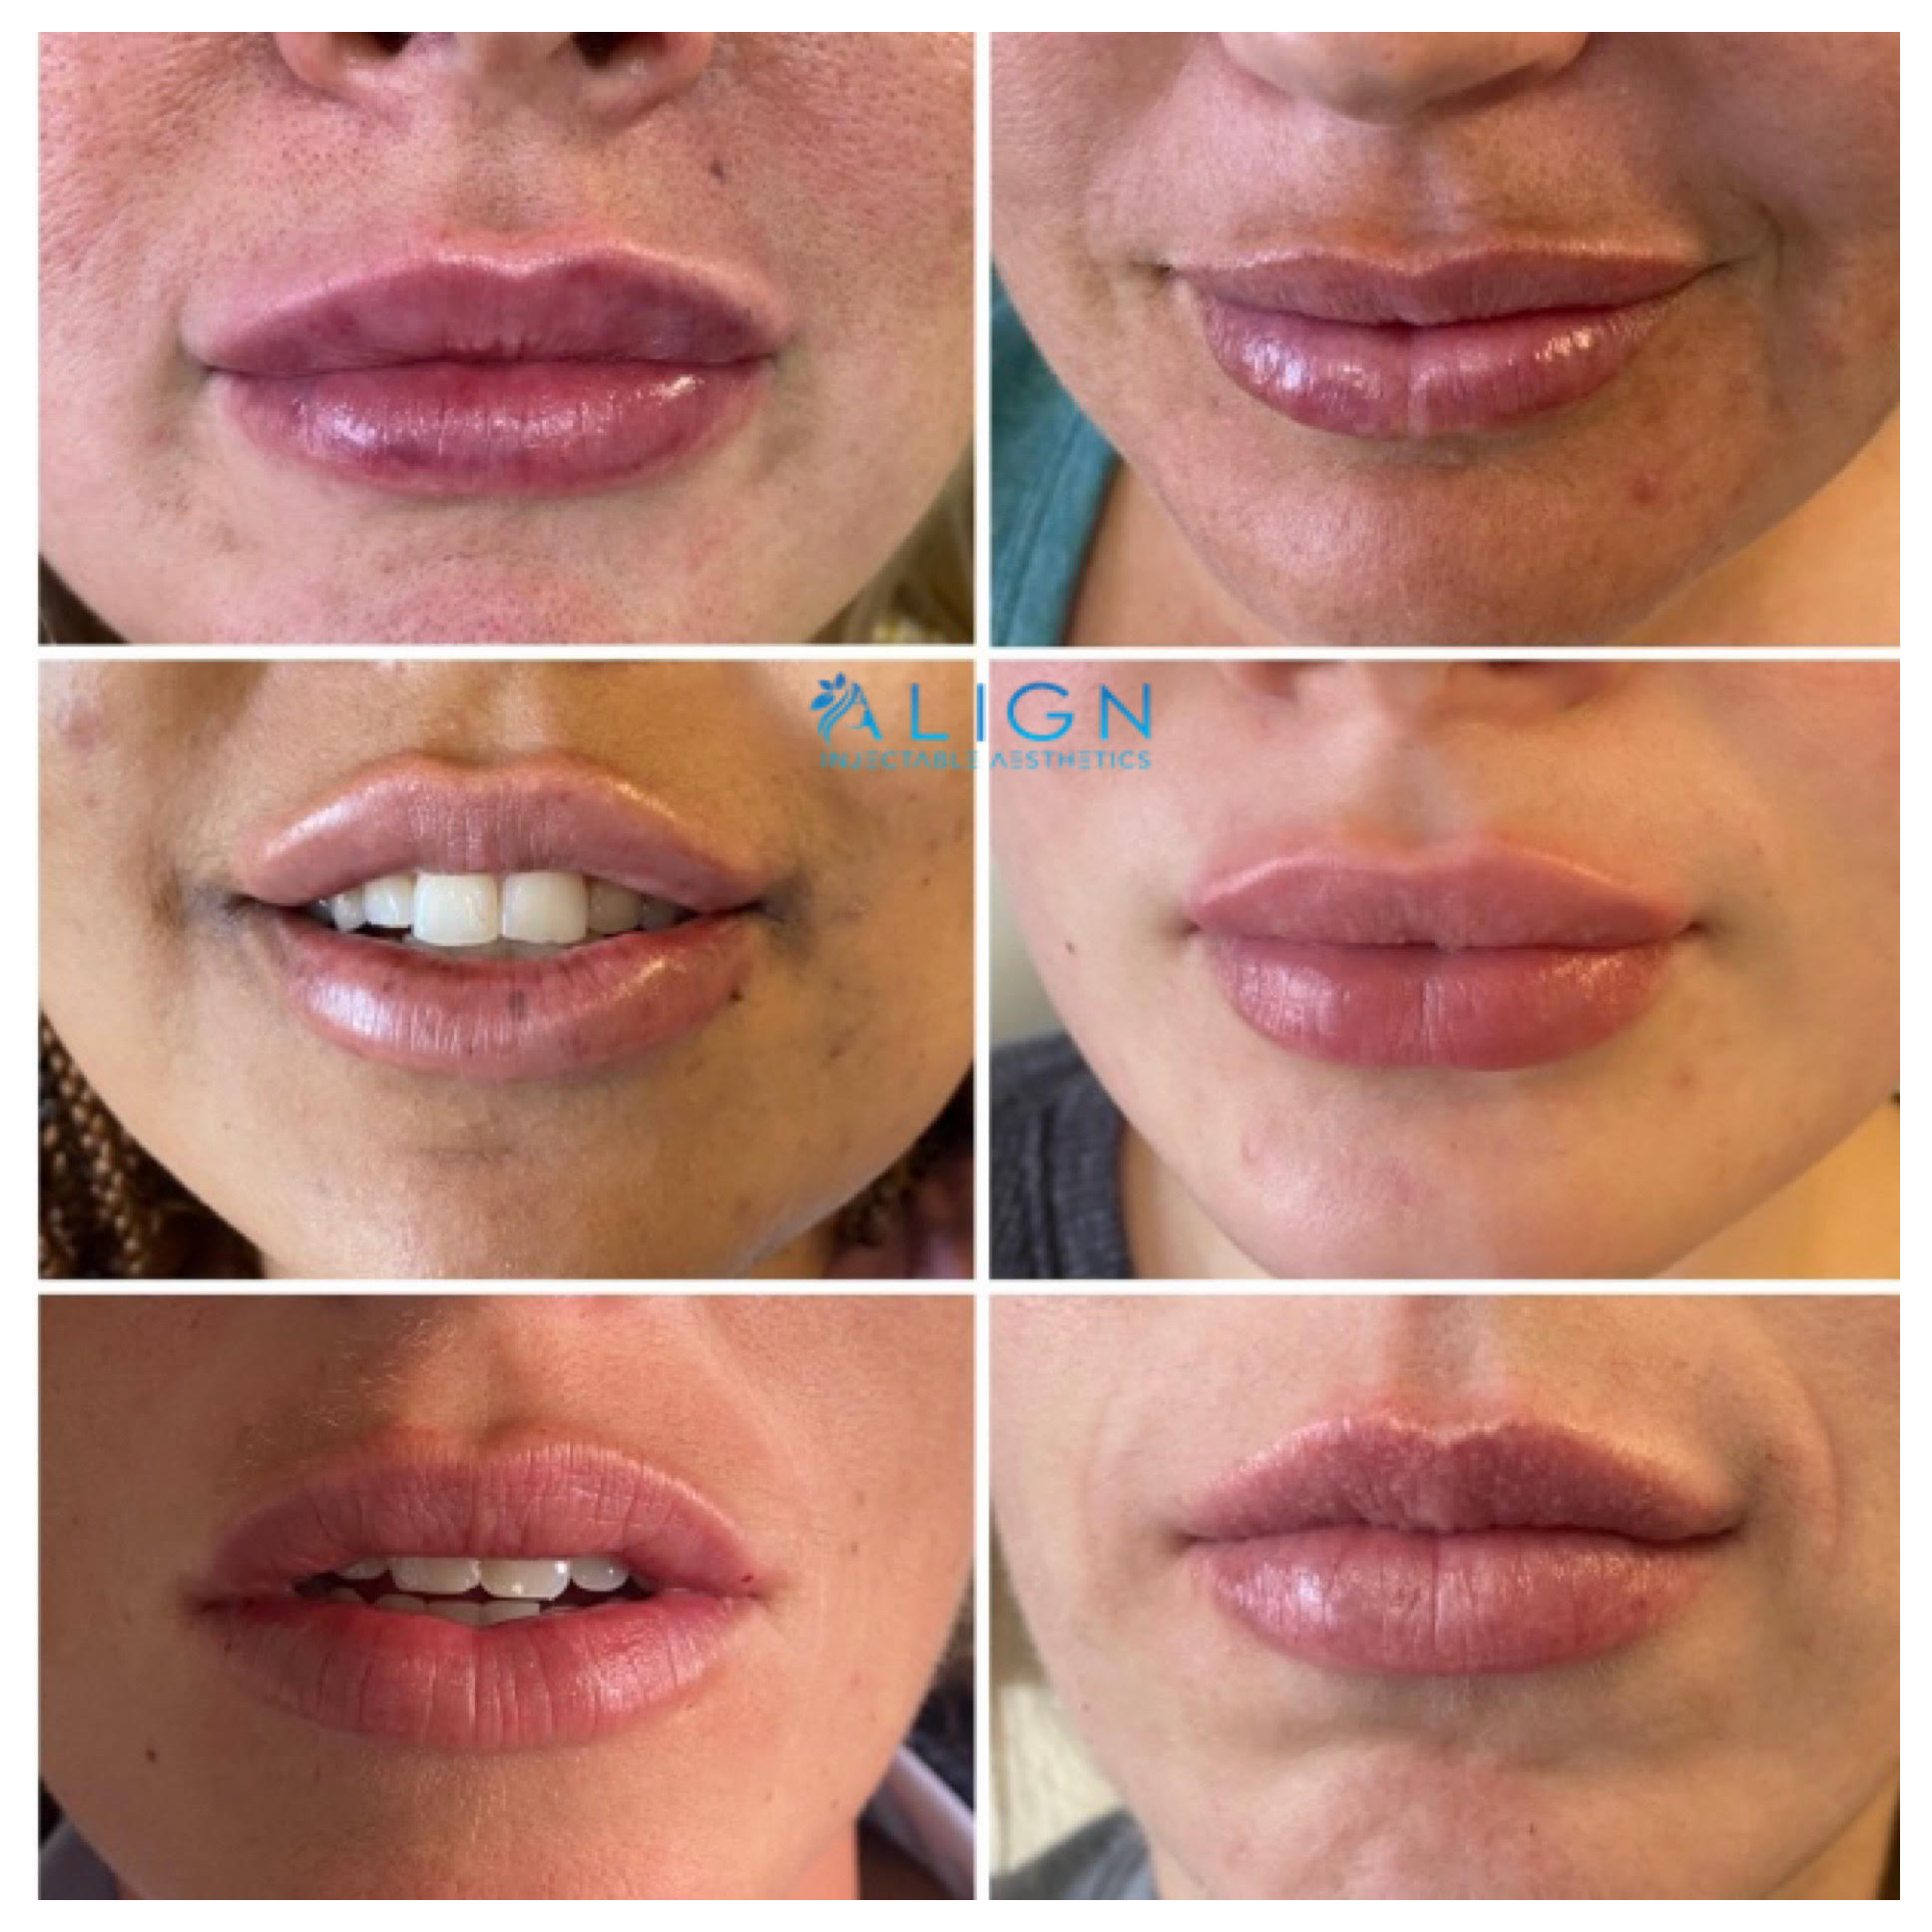 Lip filler: 10 things I wish I'd Known Before My Appointment